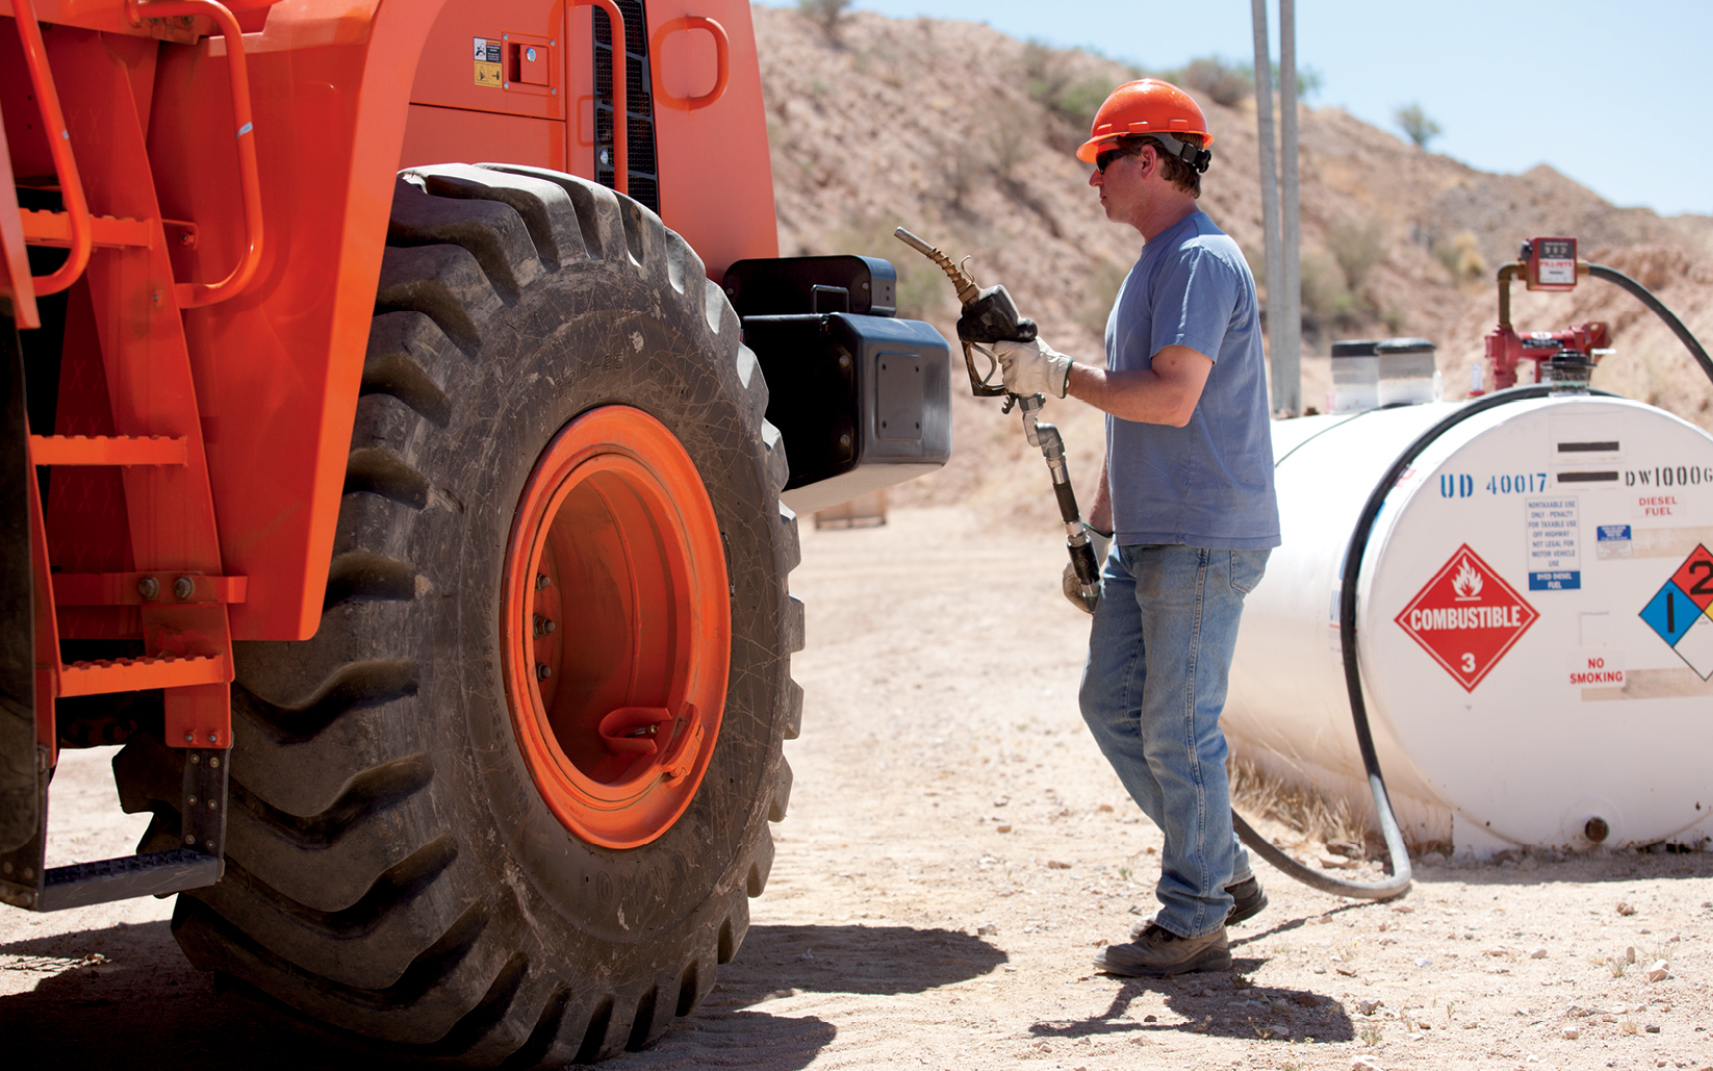 An operator adds diesel fuel to a DEVELON wheel loader.